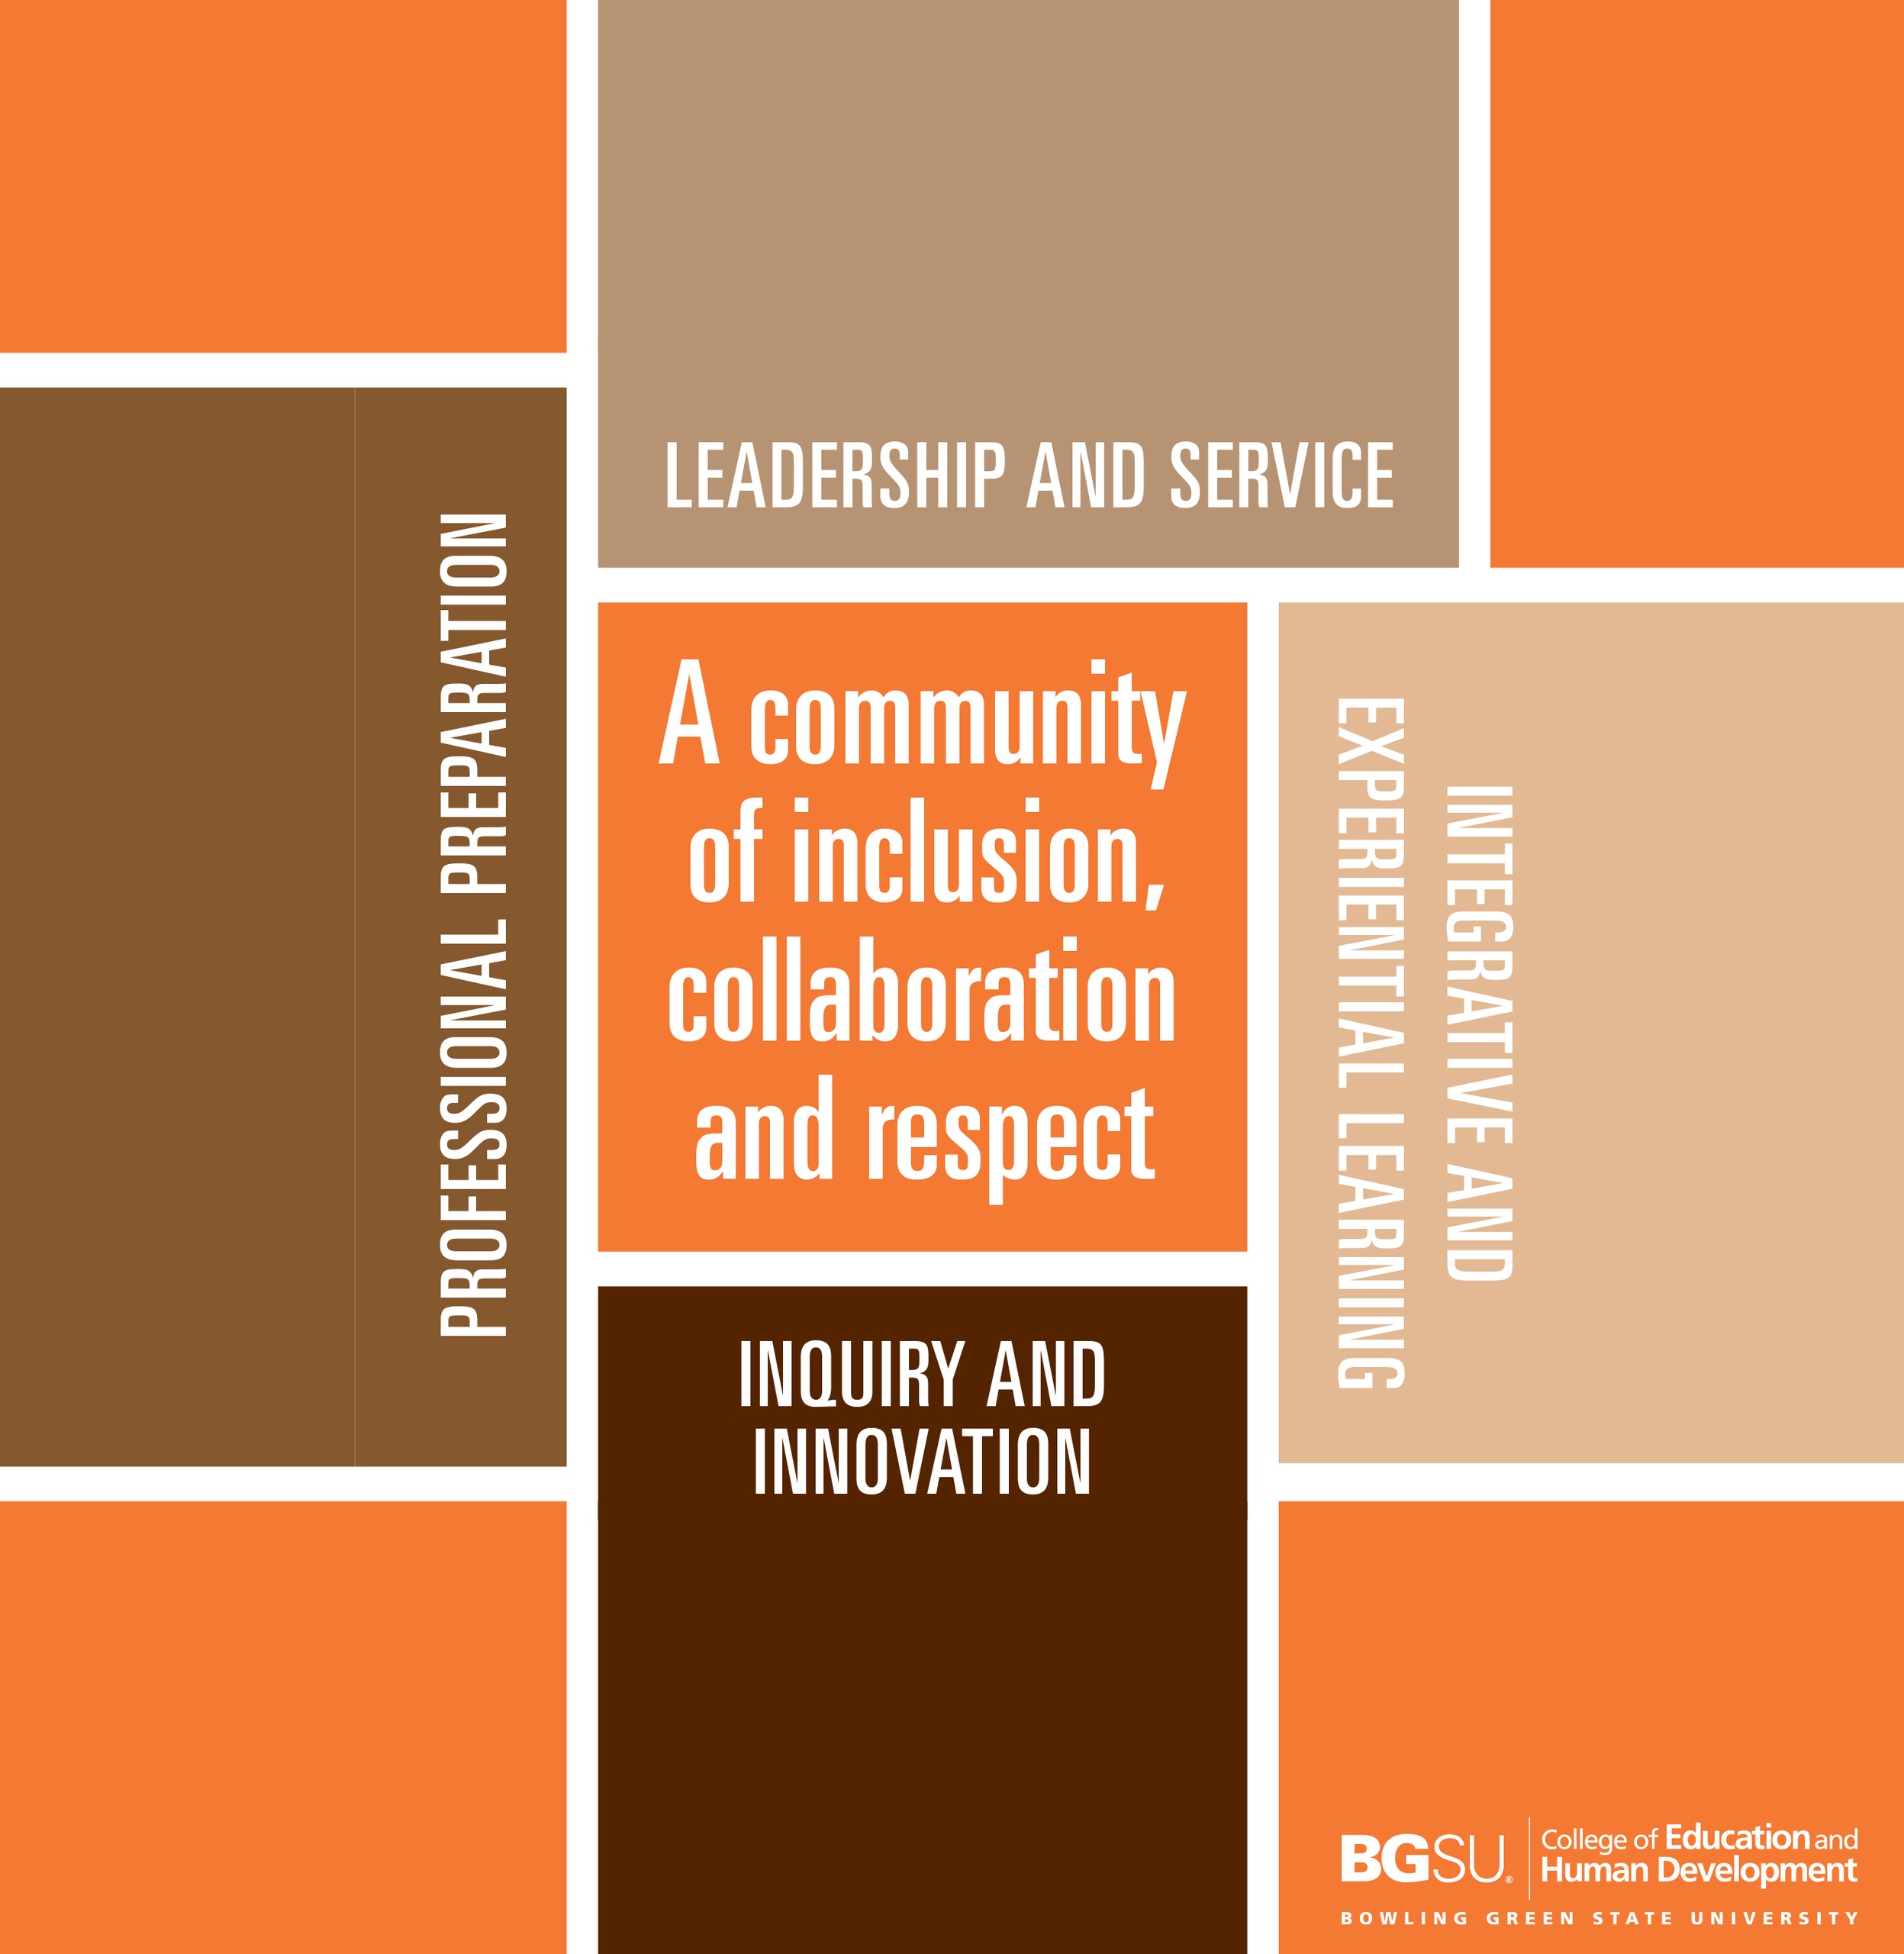 A community of inclusion, collaboration, and respect